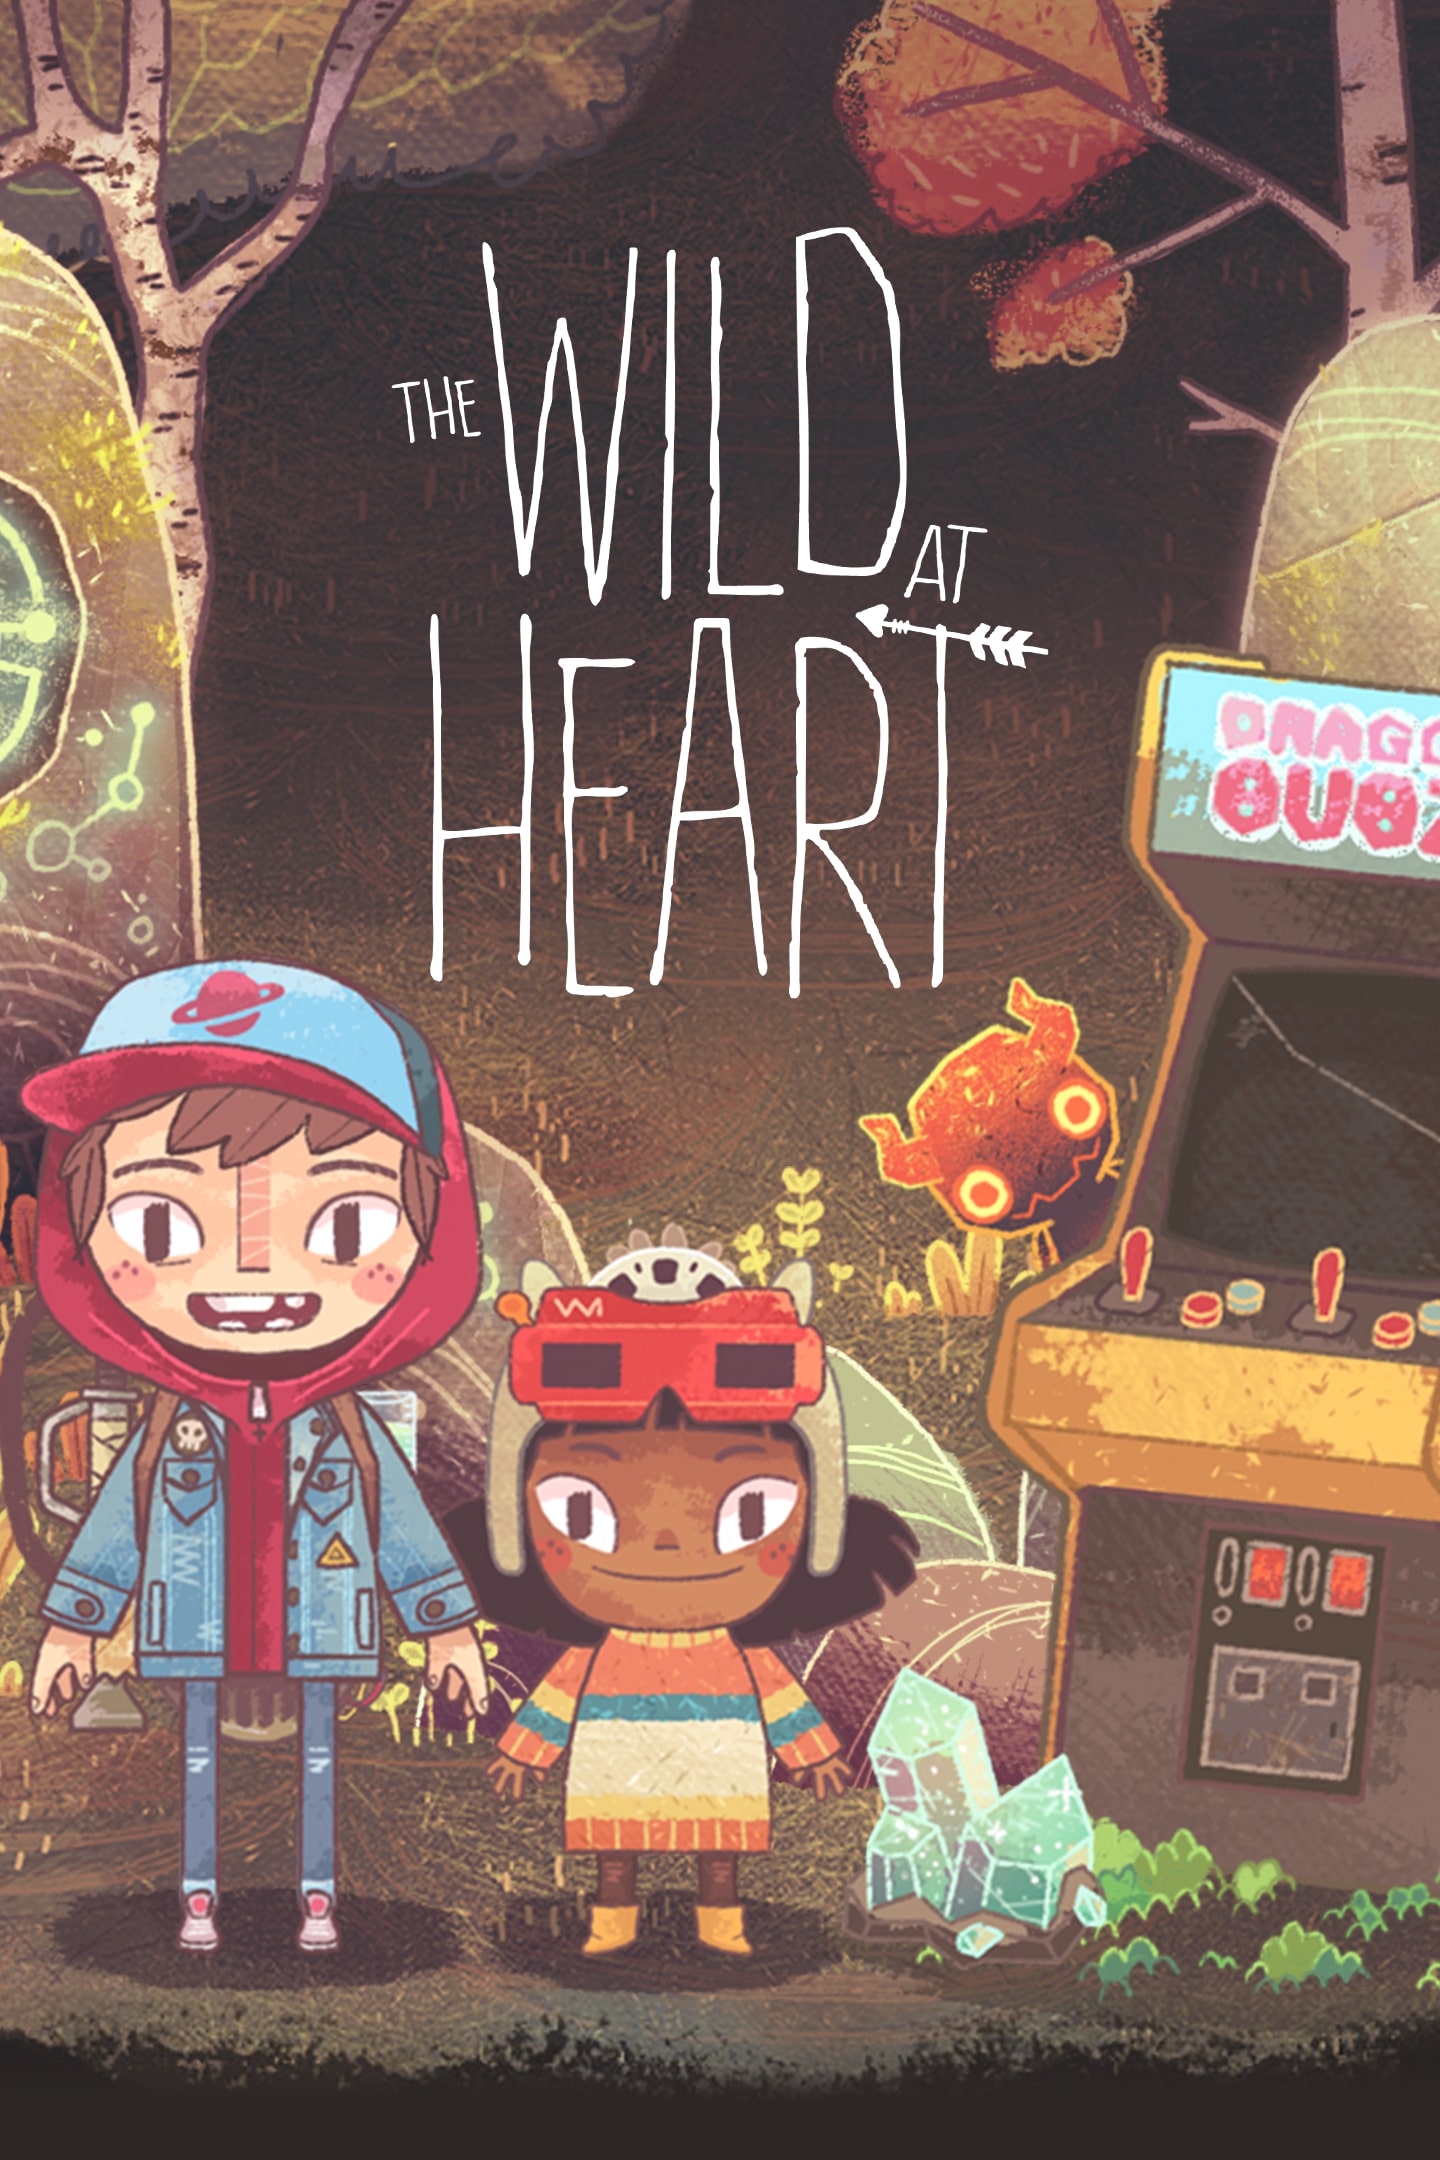 The Wild at Heart - Humble Games